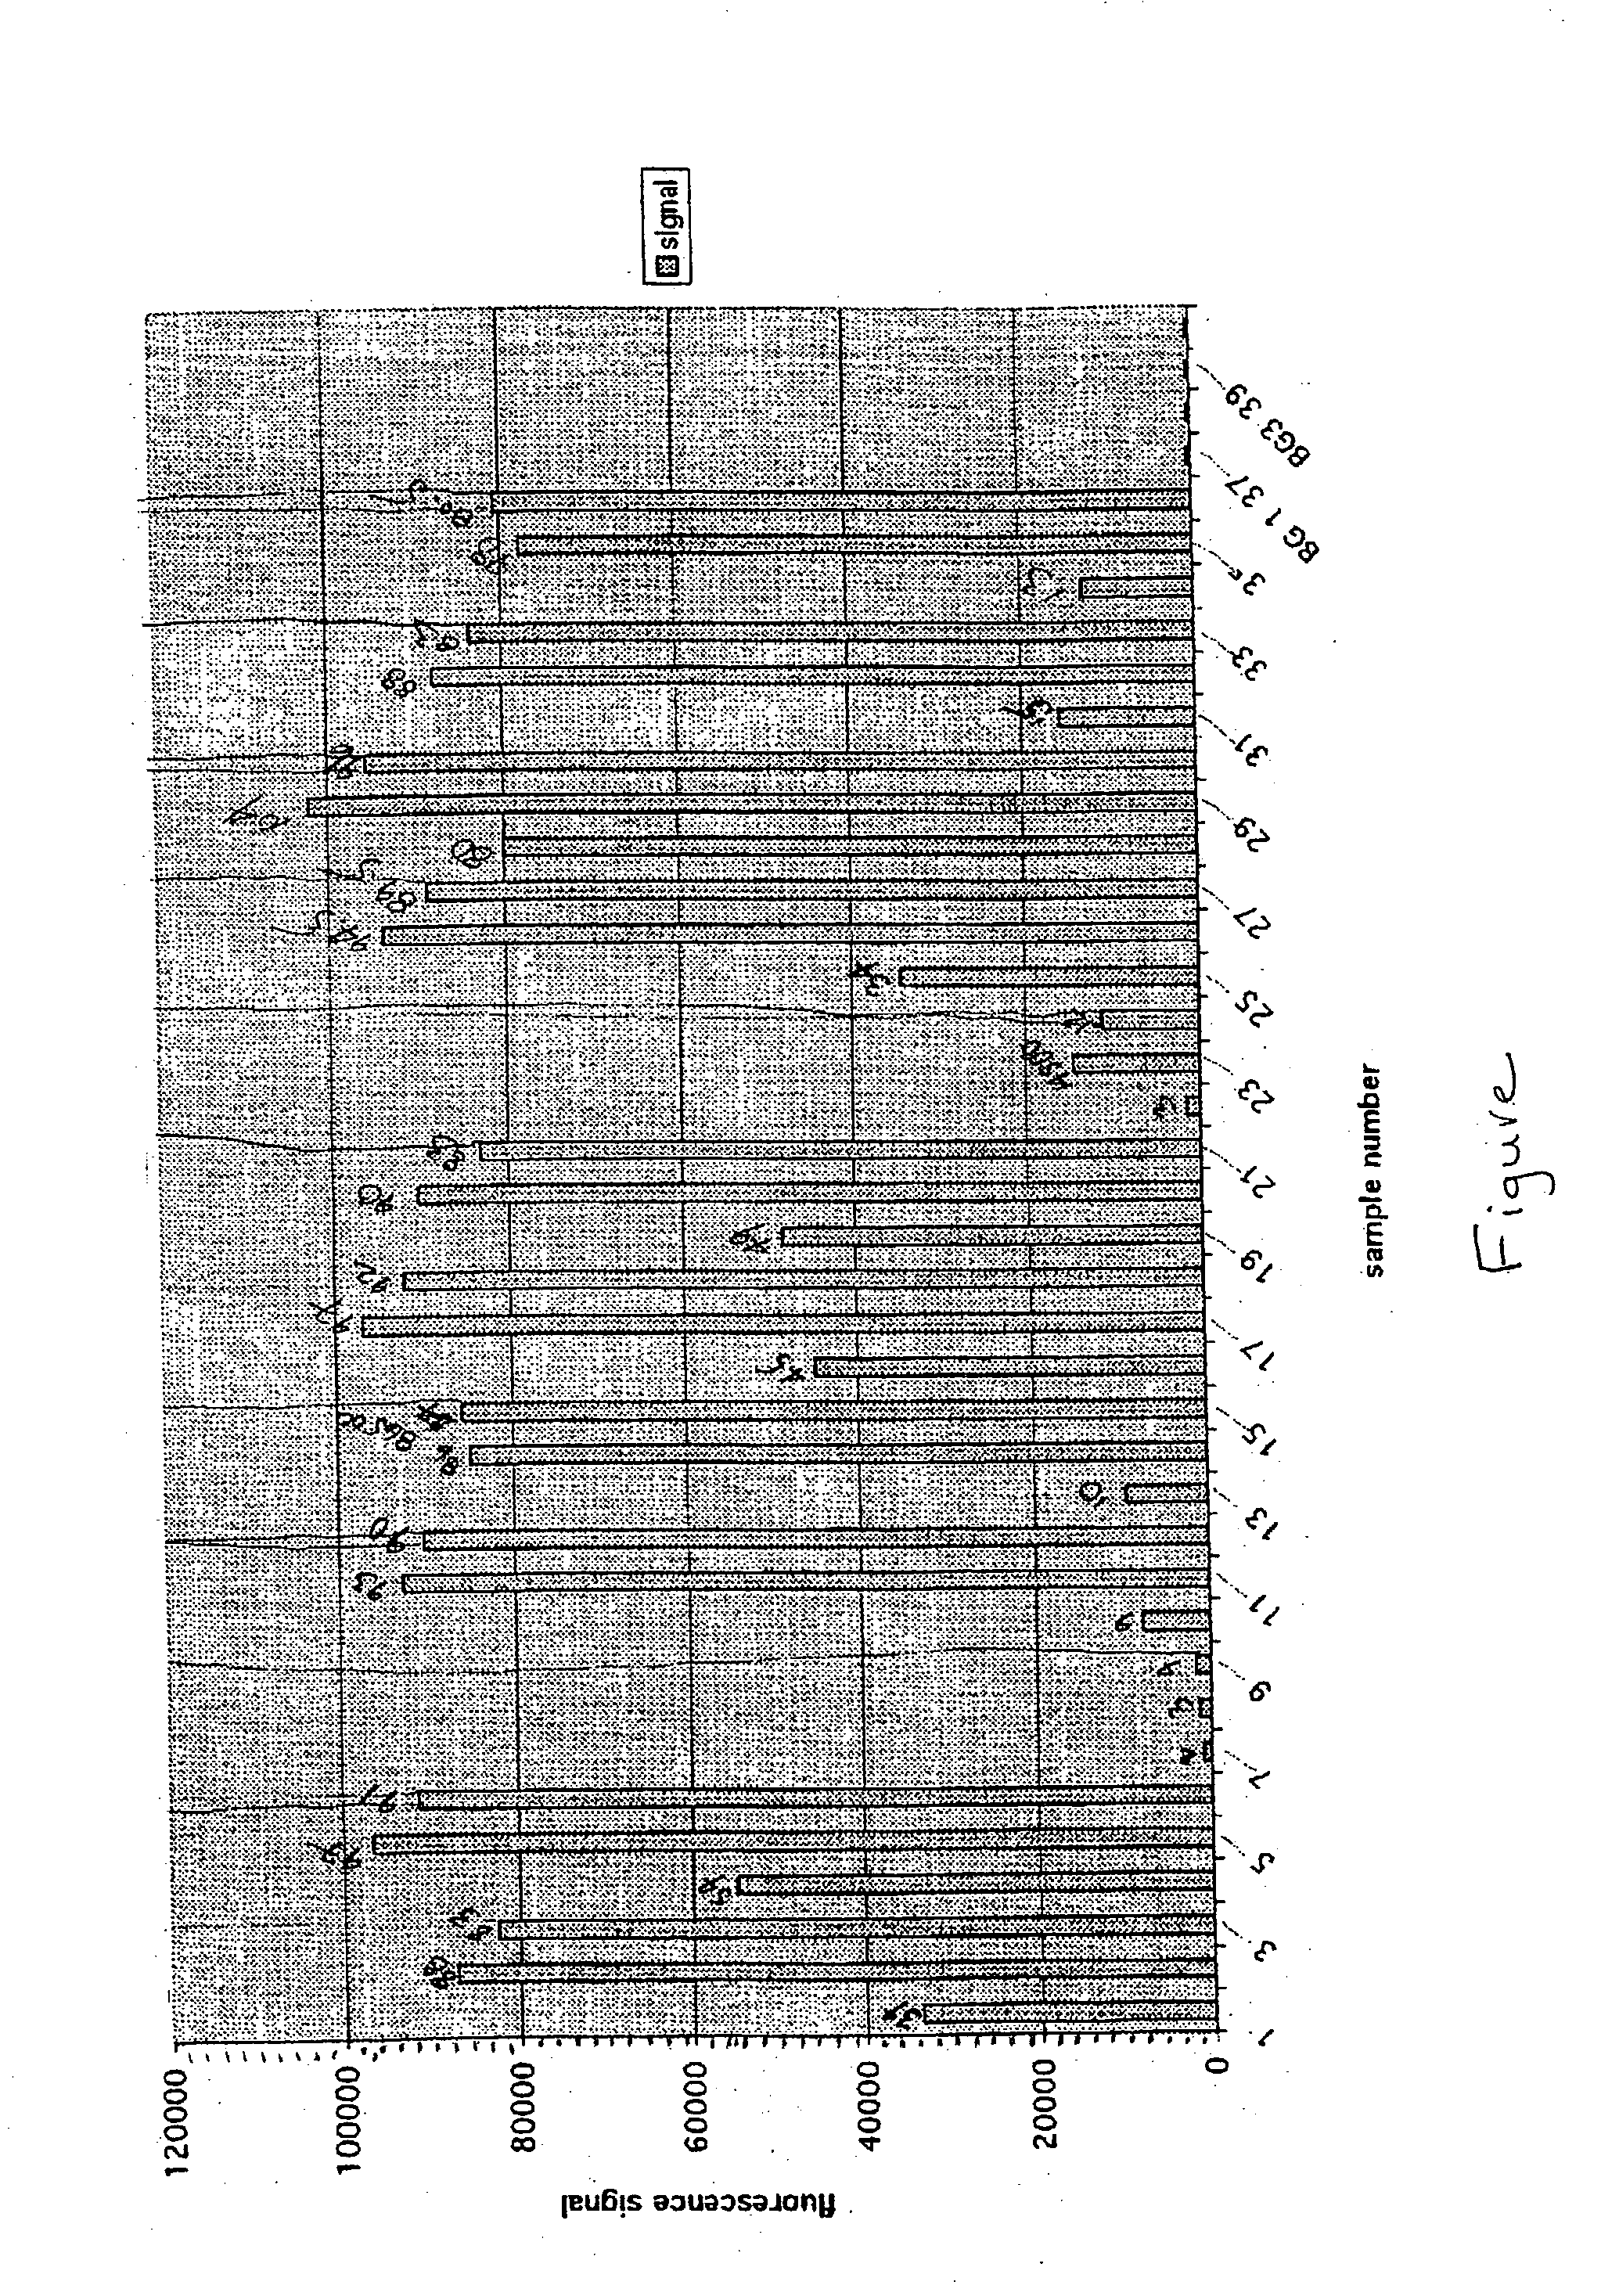 Arrays with modified oligonucleotide and polynucleotide compositions